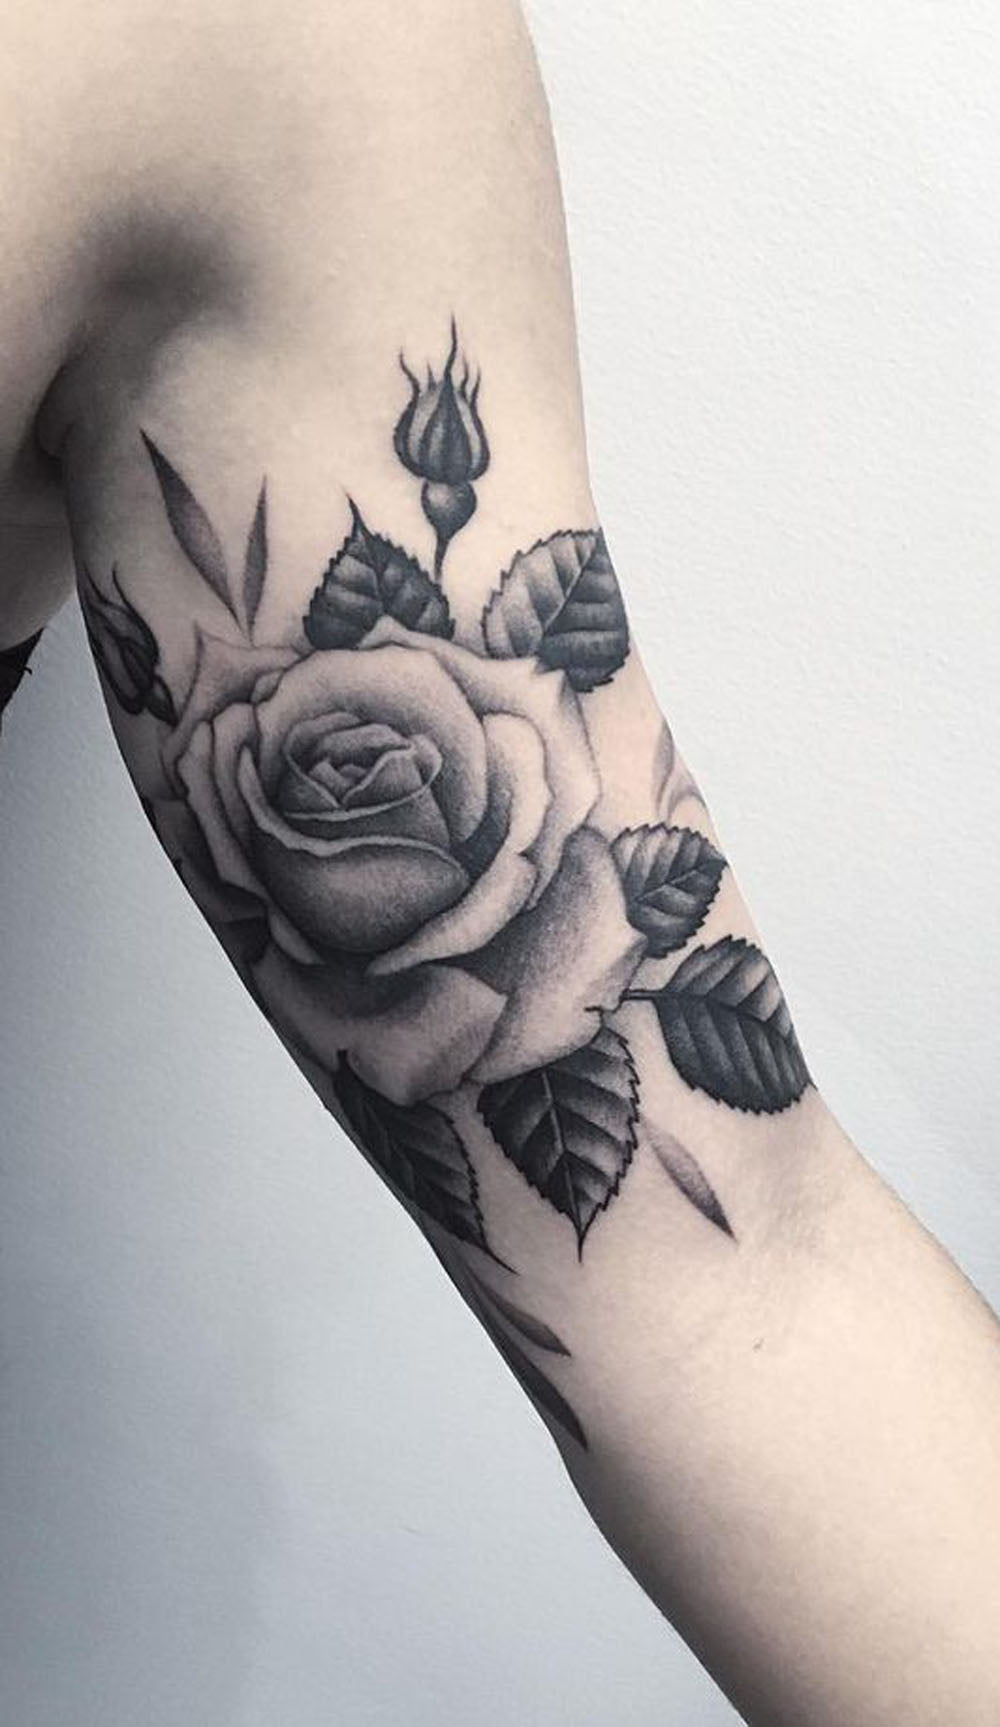 Realistic Black and White Rose Bicep Arm Tattoo Ideas for Women - www.MyBodiArt.com 